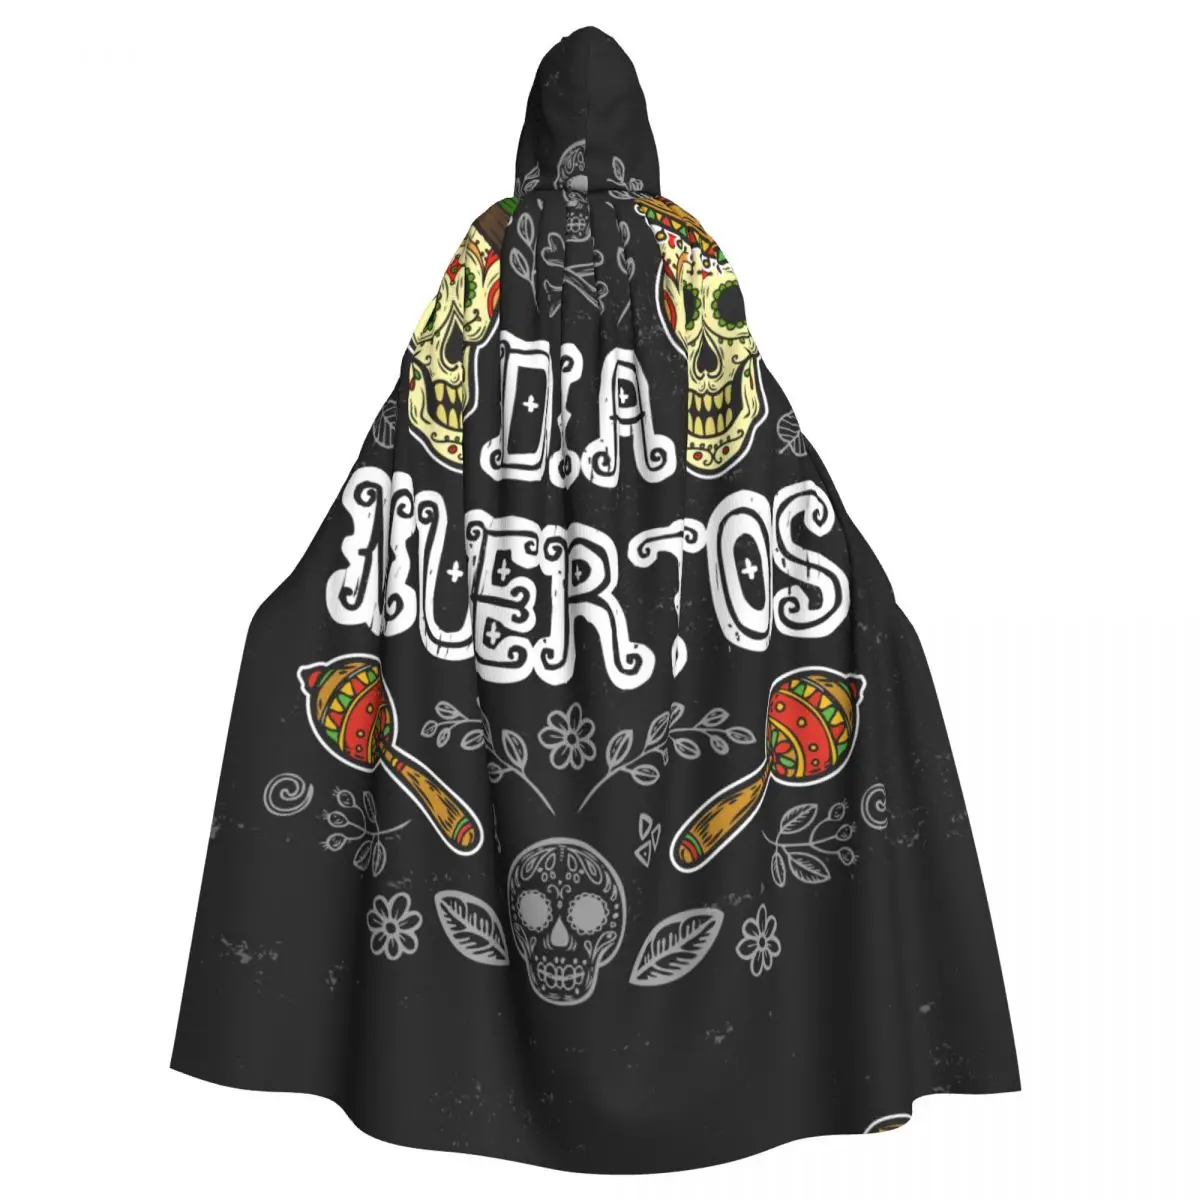 

Cloak Dia Muertos Mexican Day Of Dead Holiday Skull Cape Hooded Medieval Costume Witch Wicca Vampire Elf Purim Carnival Party